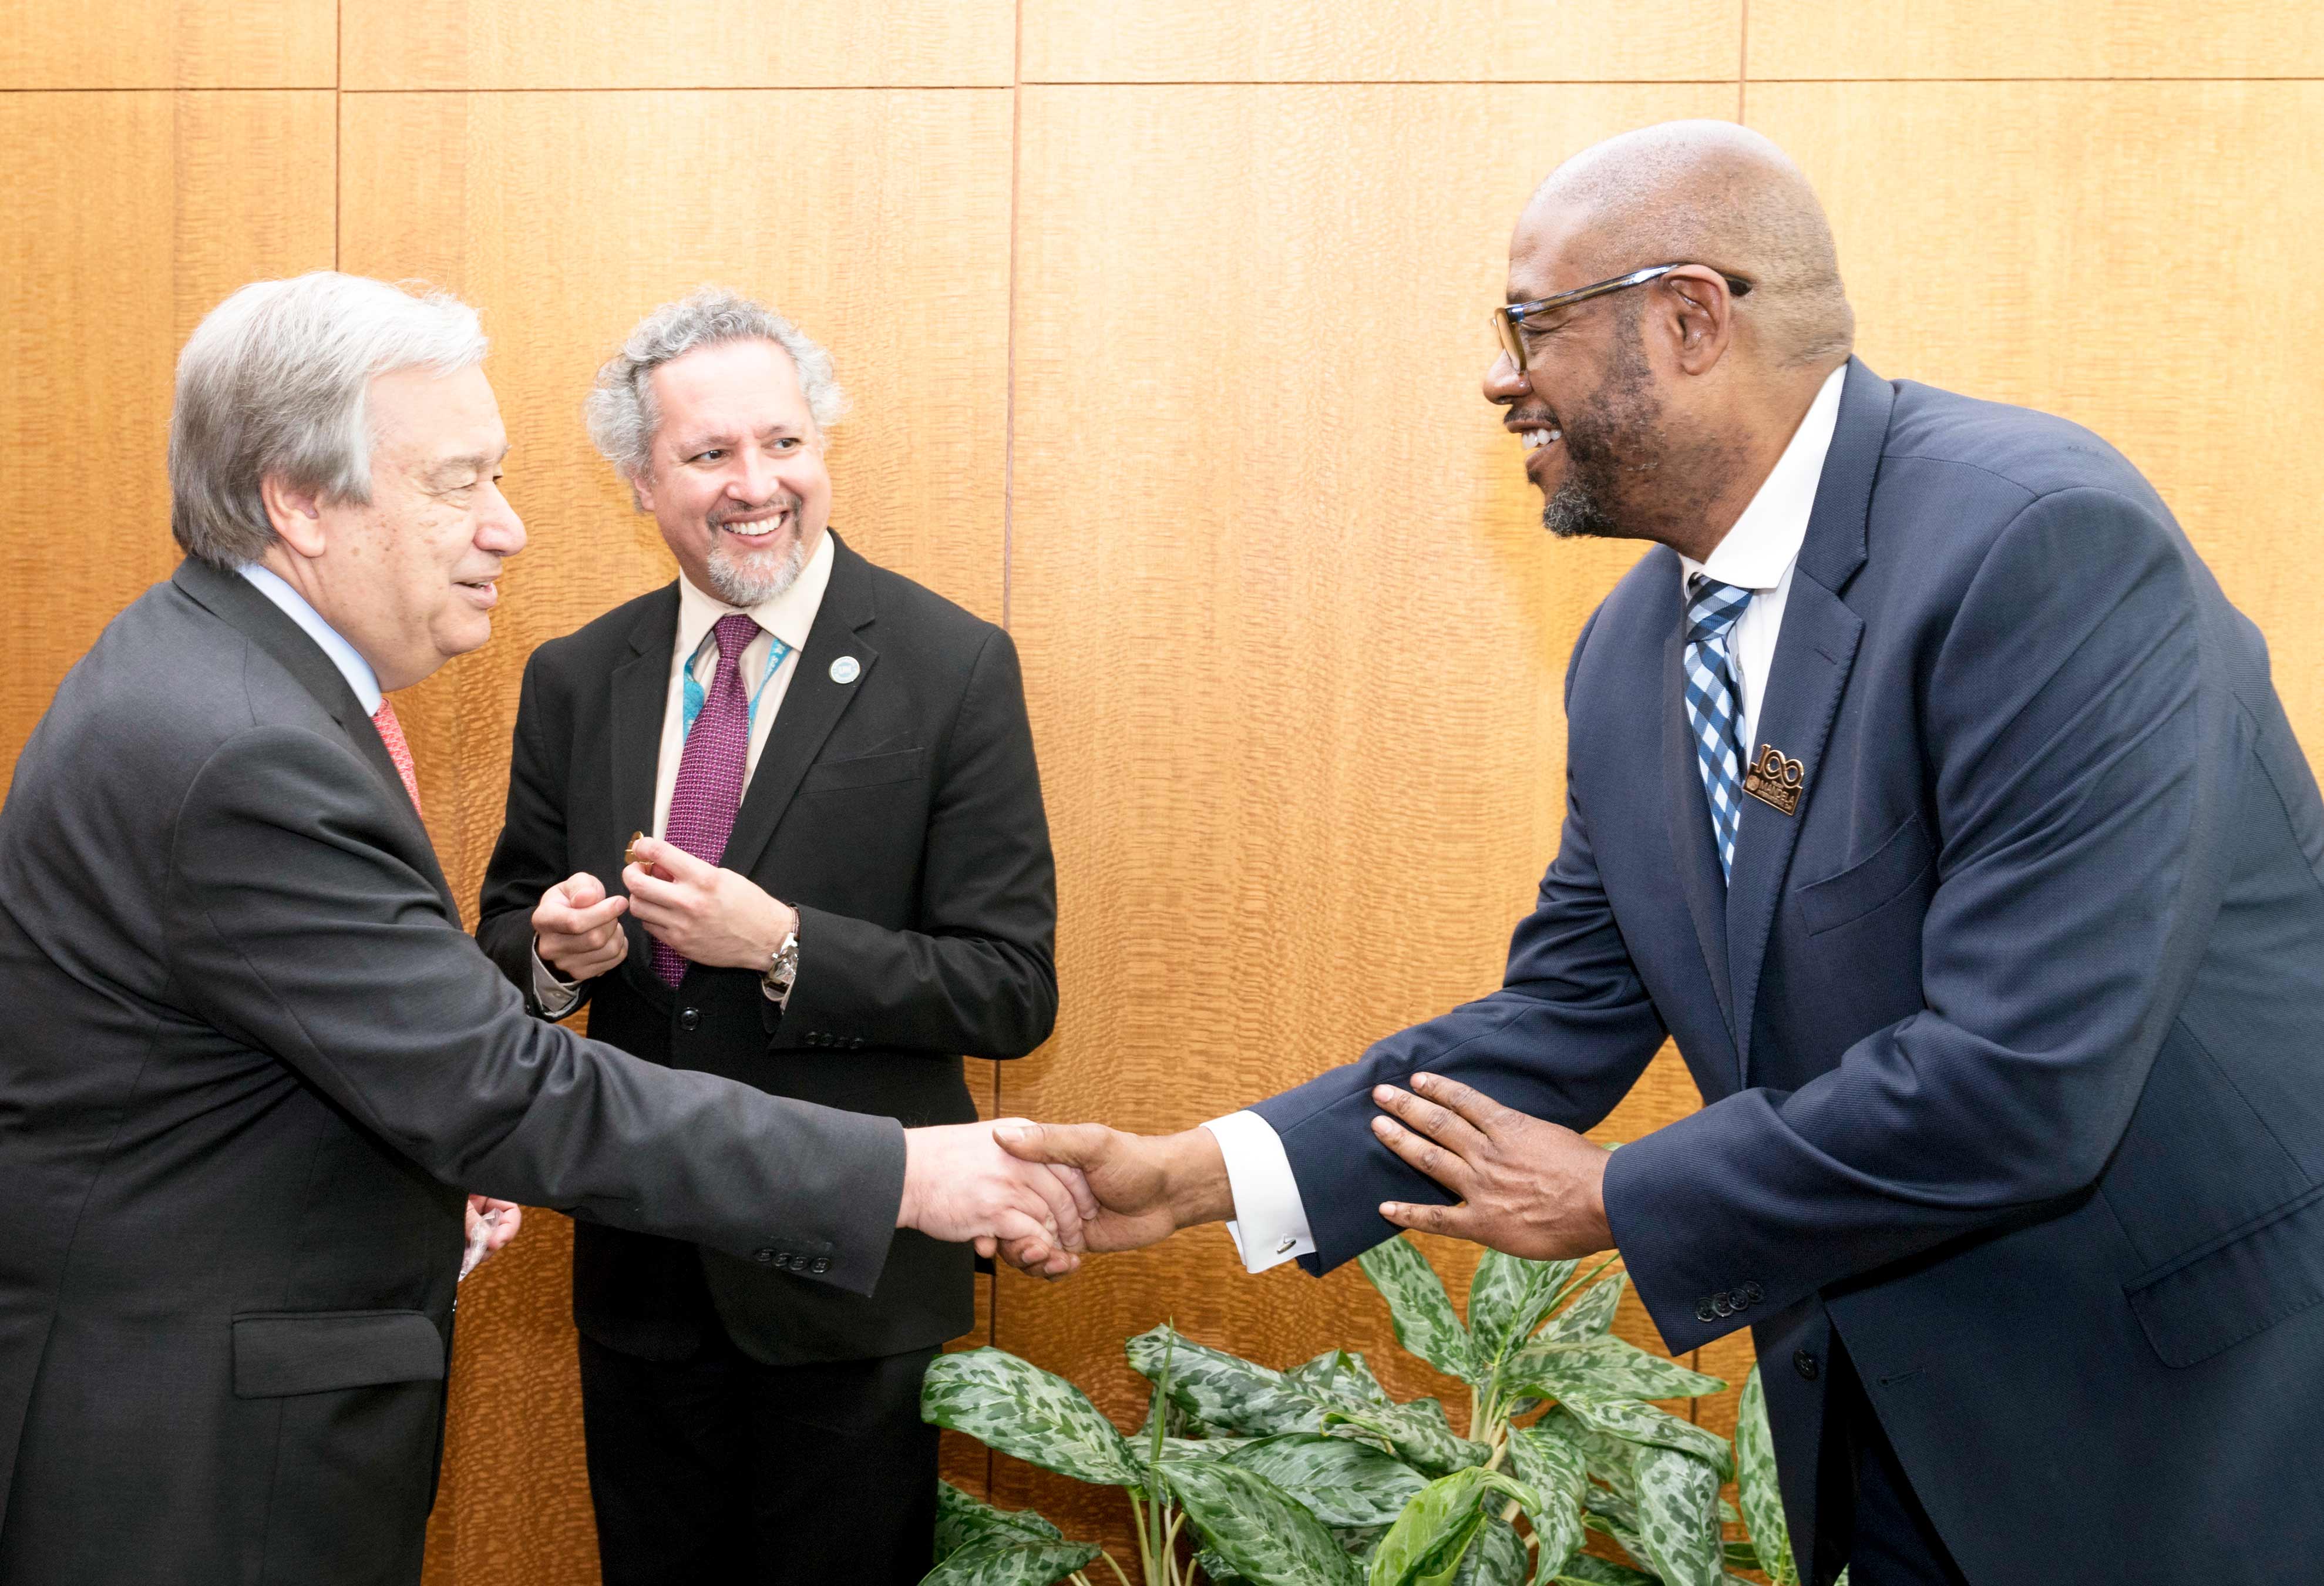 Secretary-General António Guterres (left) greets Forest Whitaker, UNESCO Special Envoy for Peace and Reconciliation and SDG Global Advocate. © UN Photo/Rick Bajornas